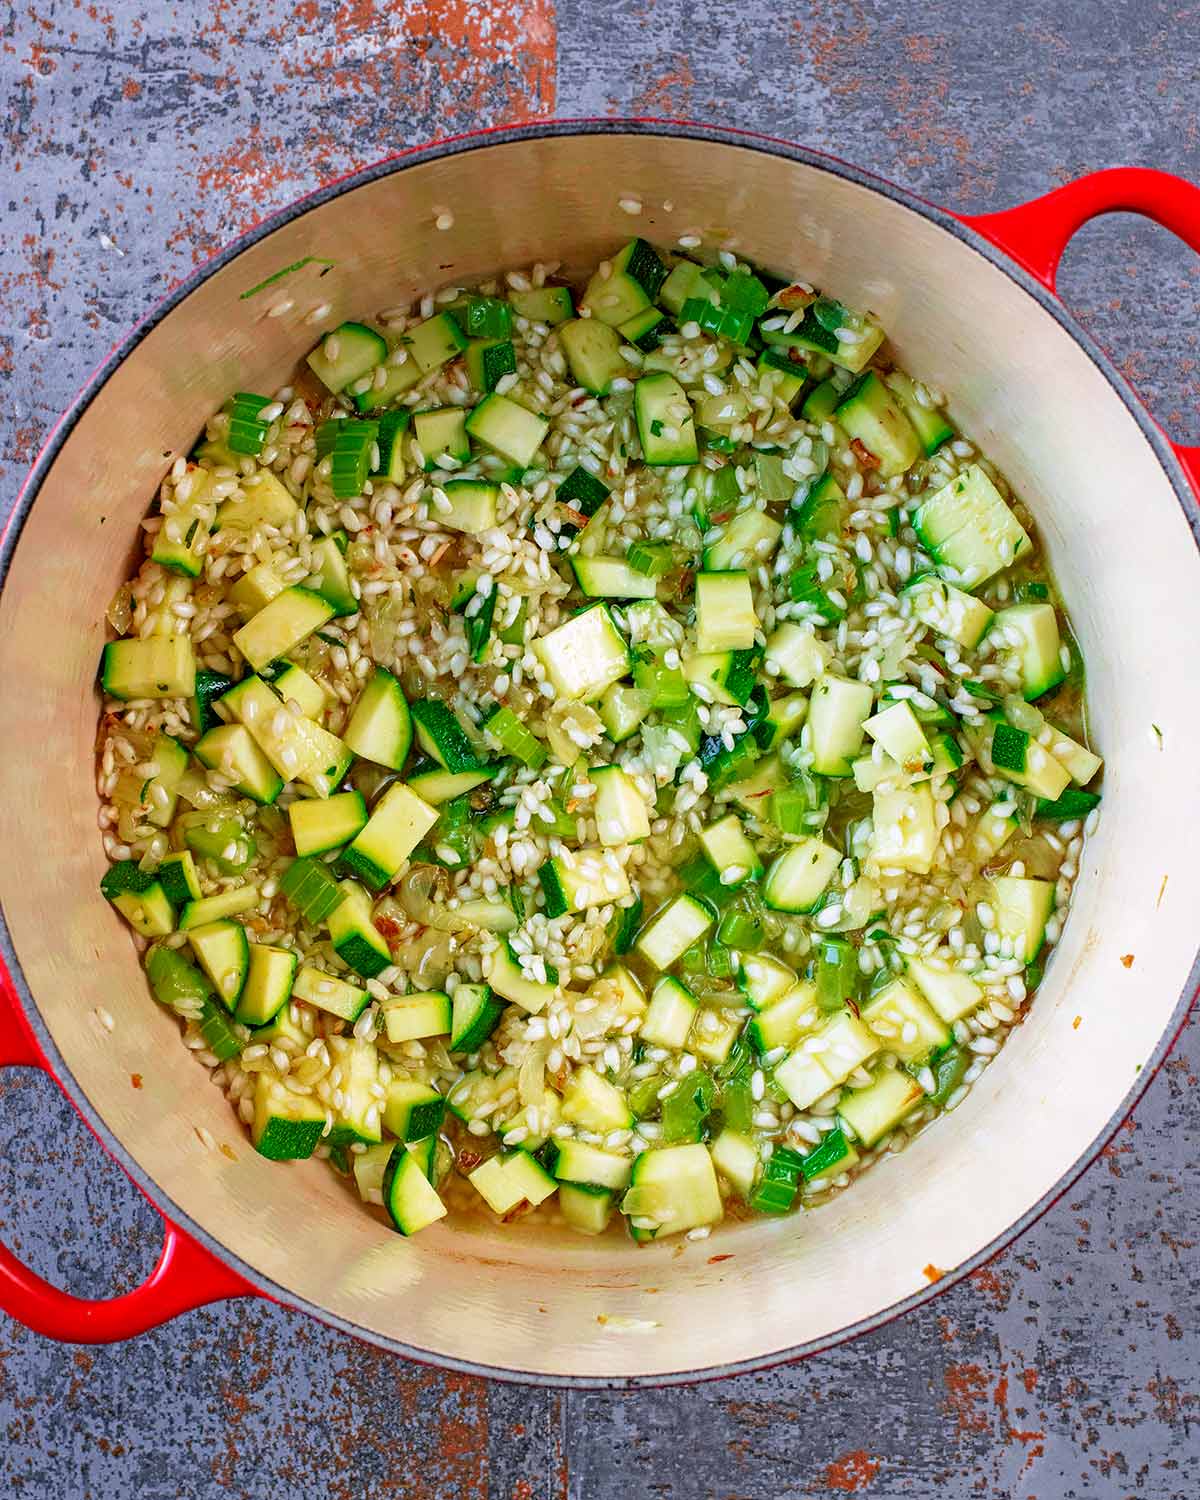 A large red pan with celery, shallots, courgette, risotto rice and stock.